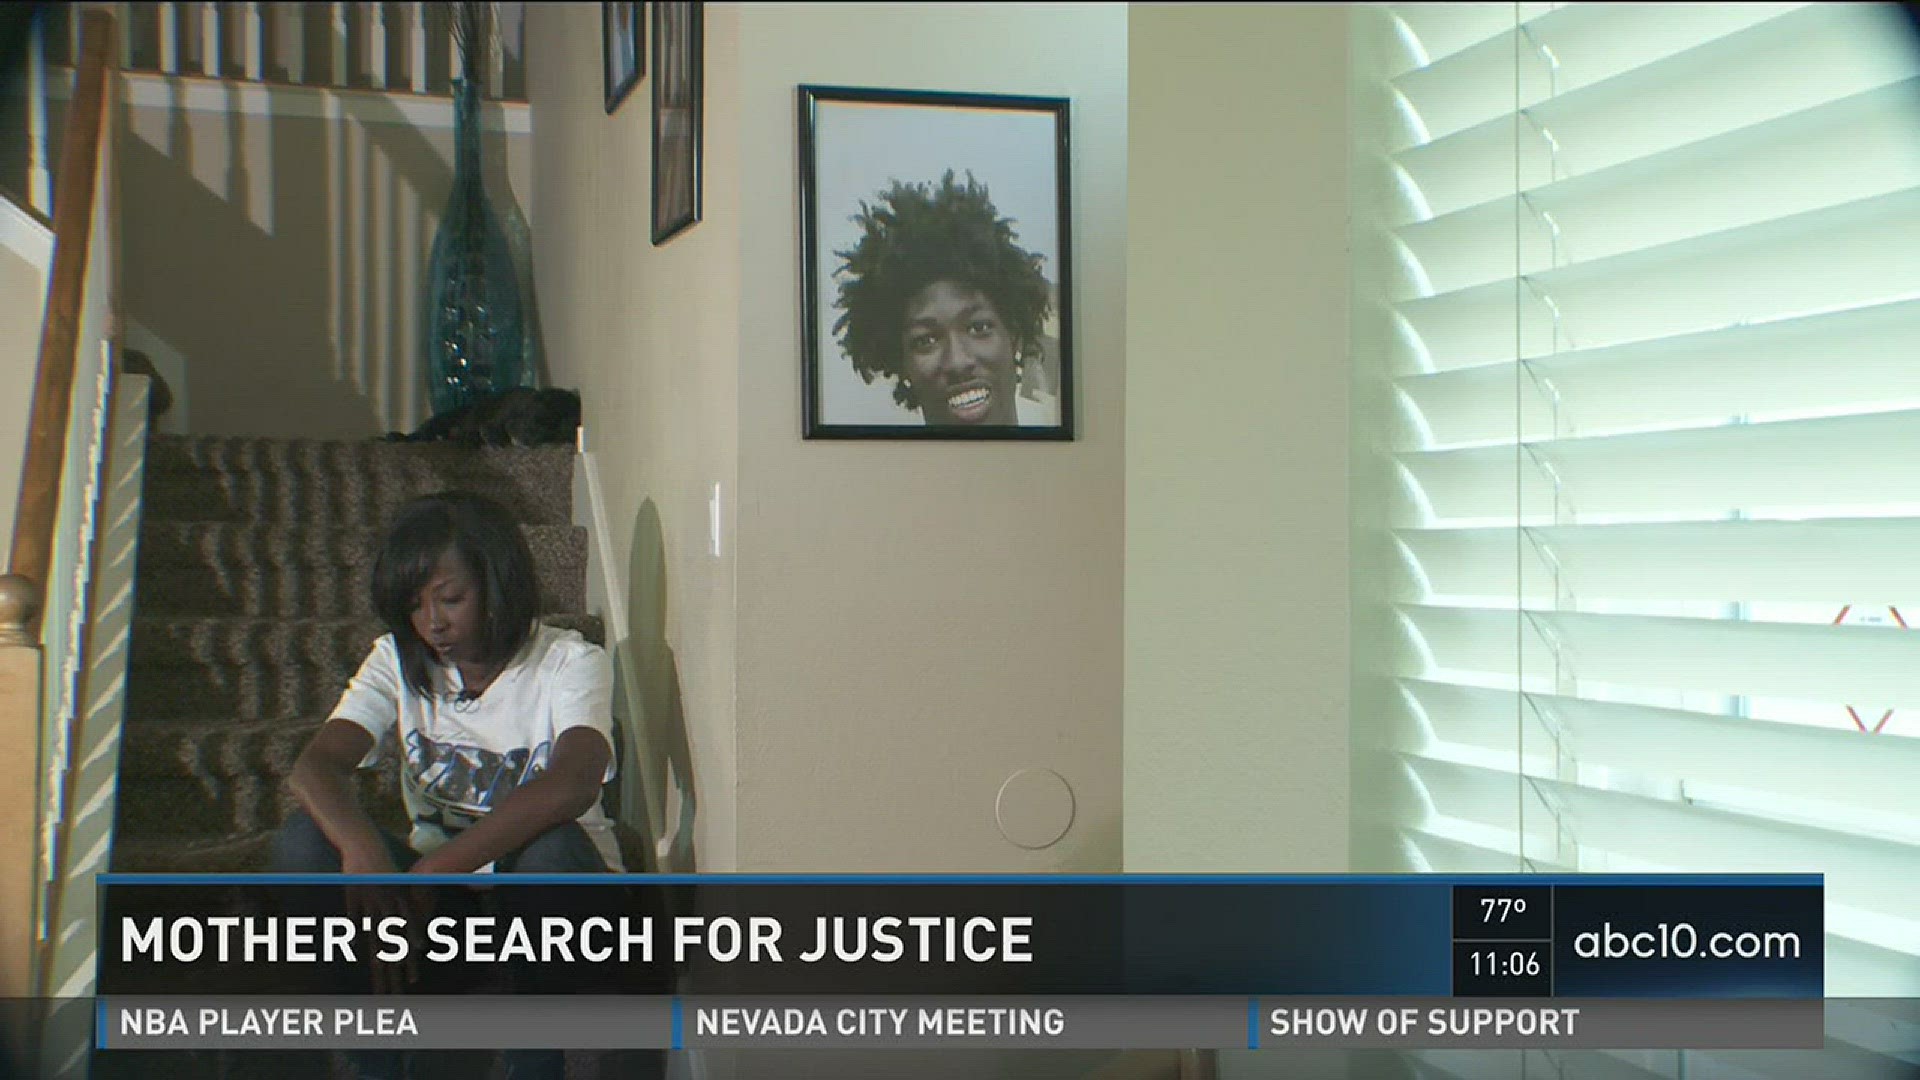 One mother is searching for justice after her son was killed. (July 13, 2016)